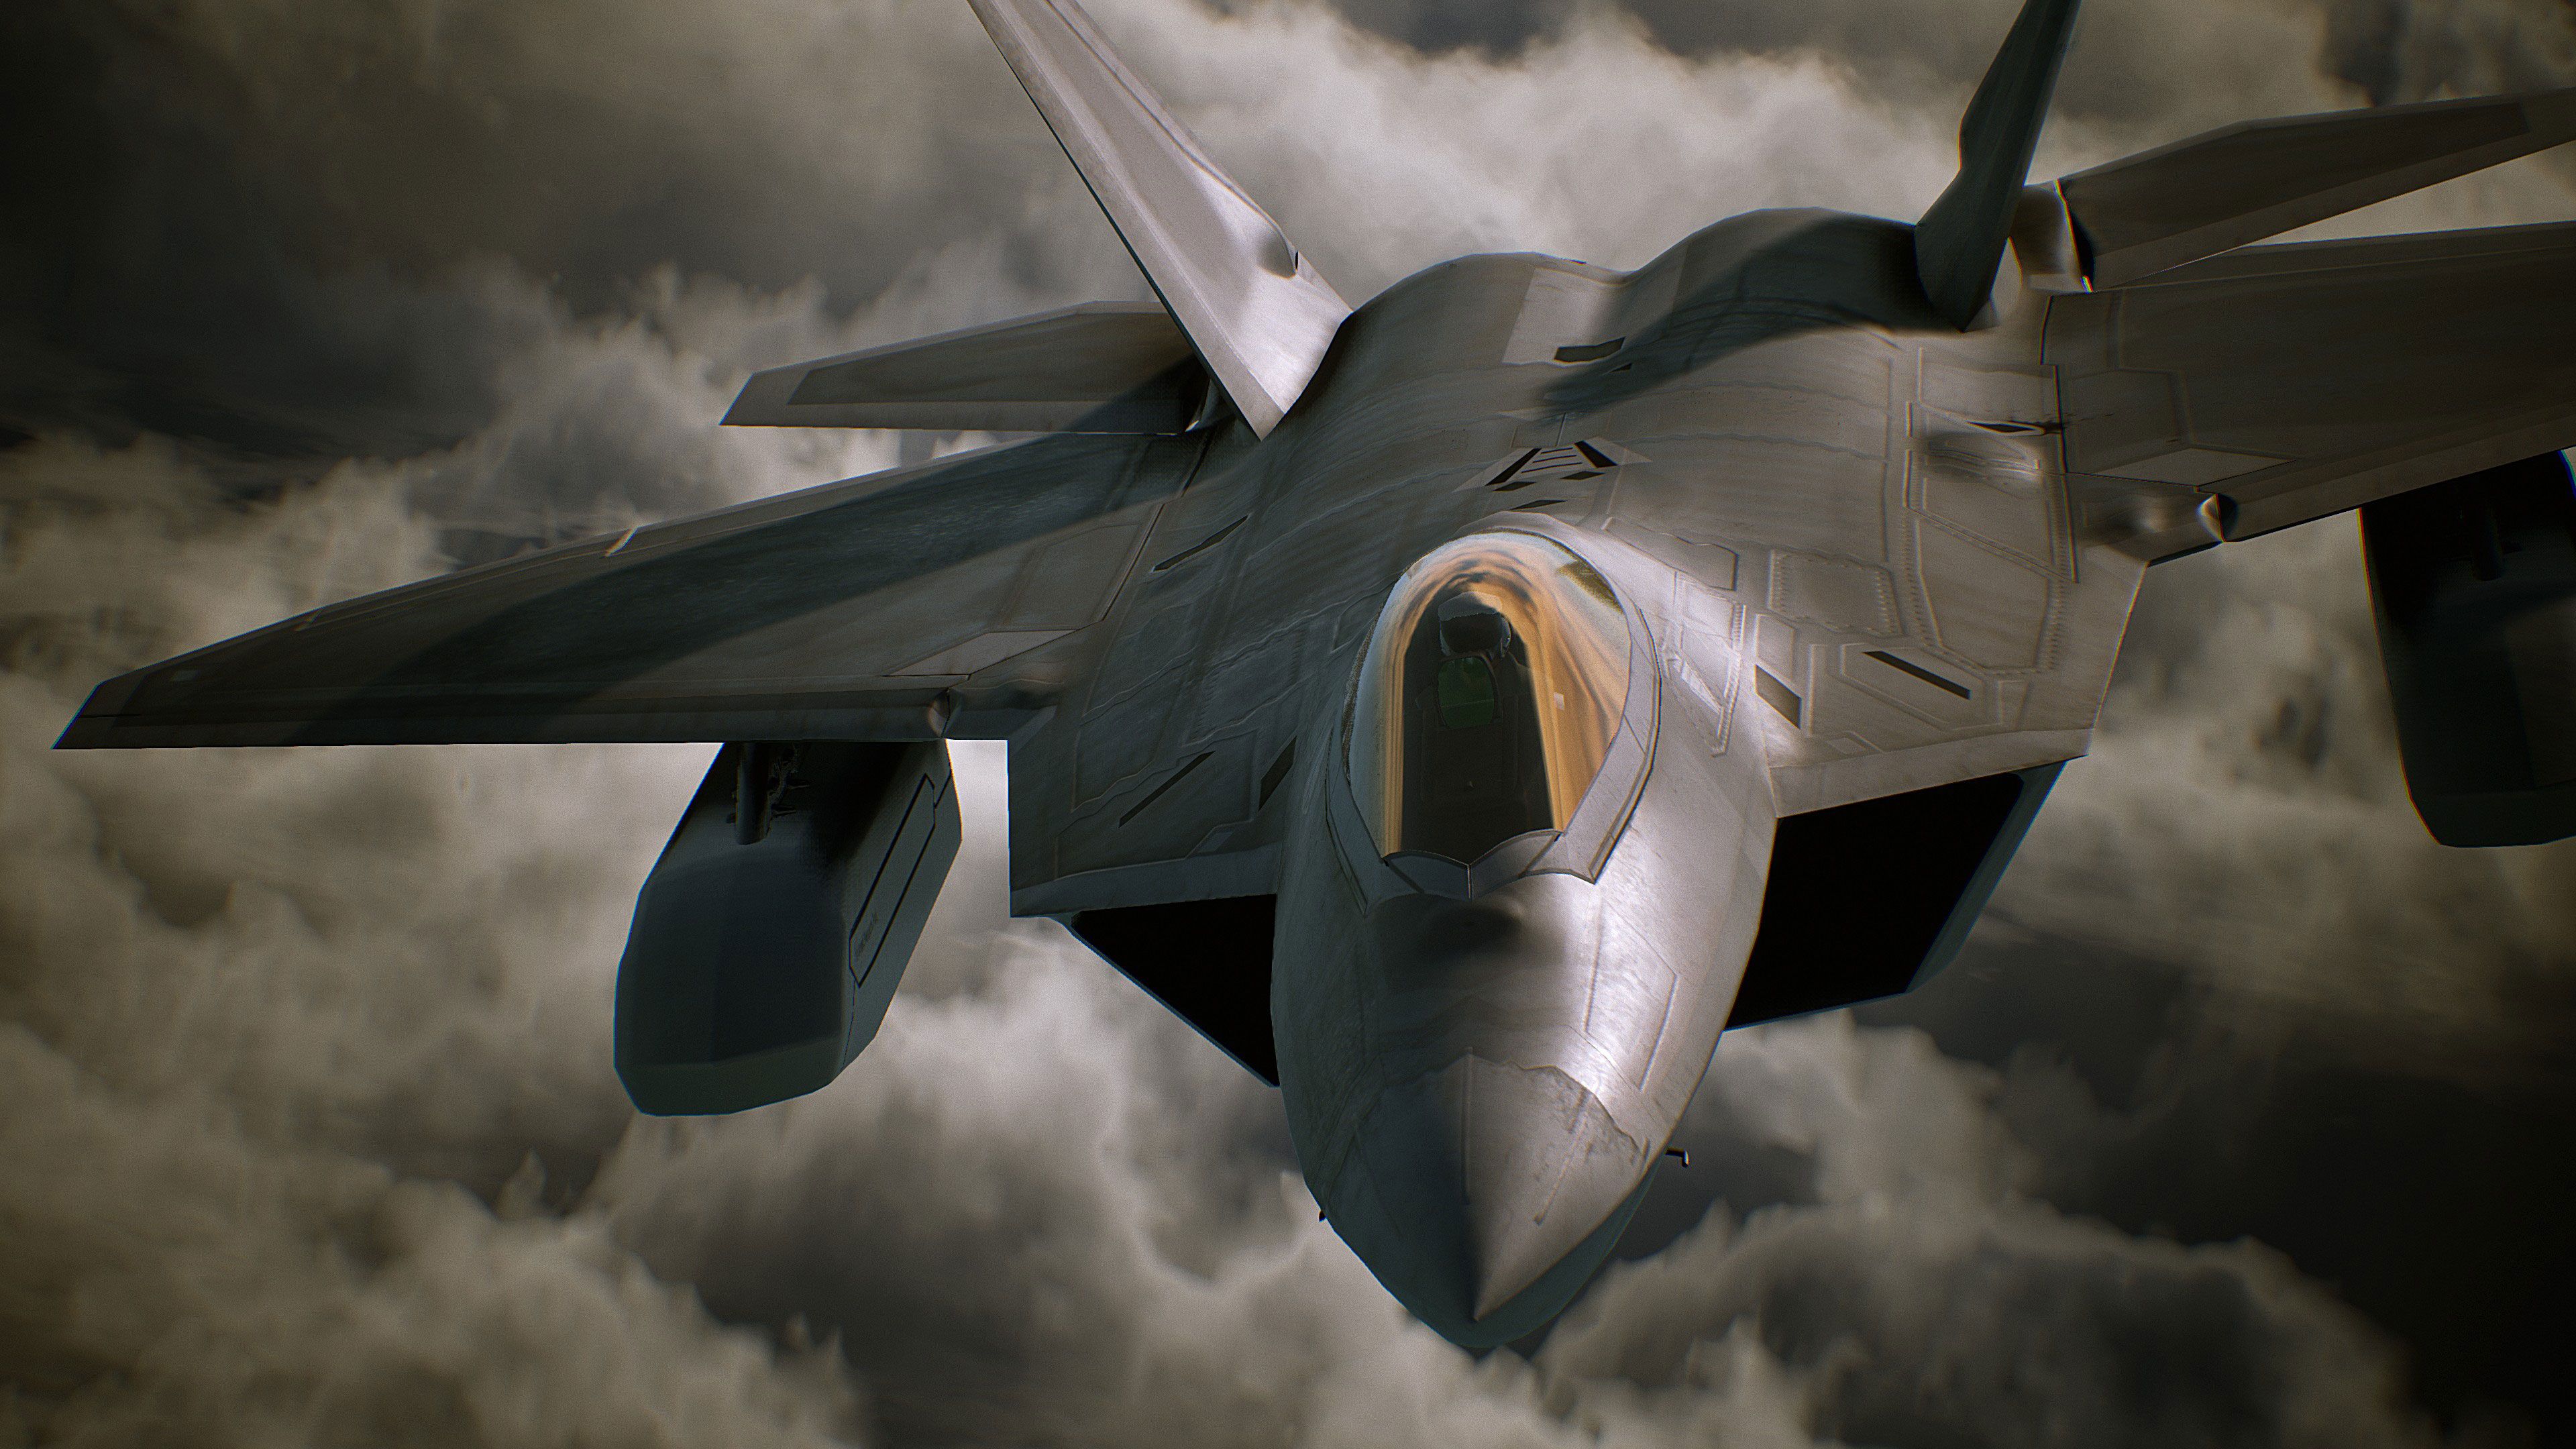 Ace Combat 7: Skies Unknown Wallpapers in Ultra HD.